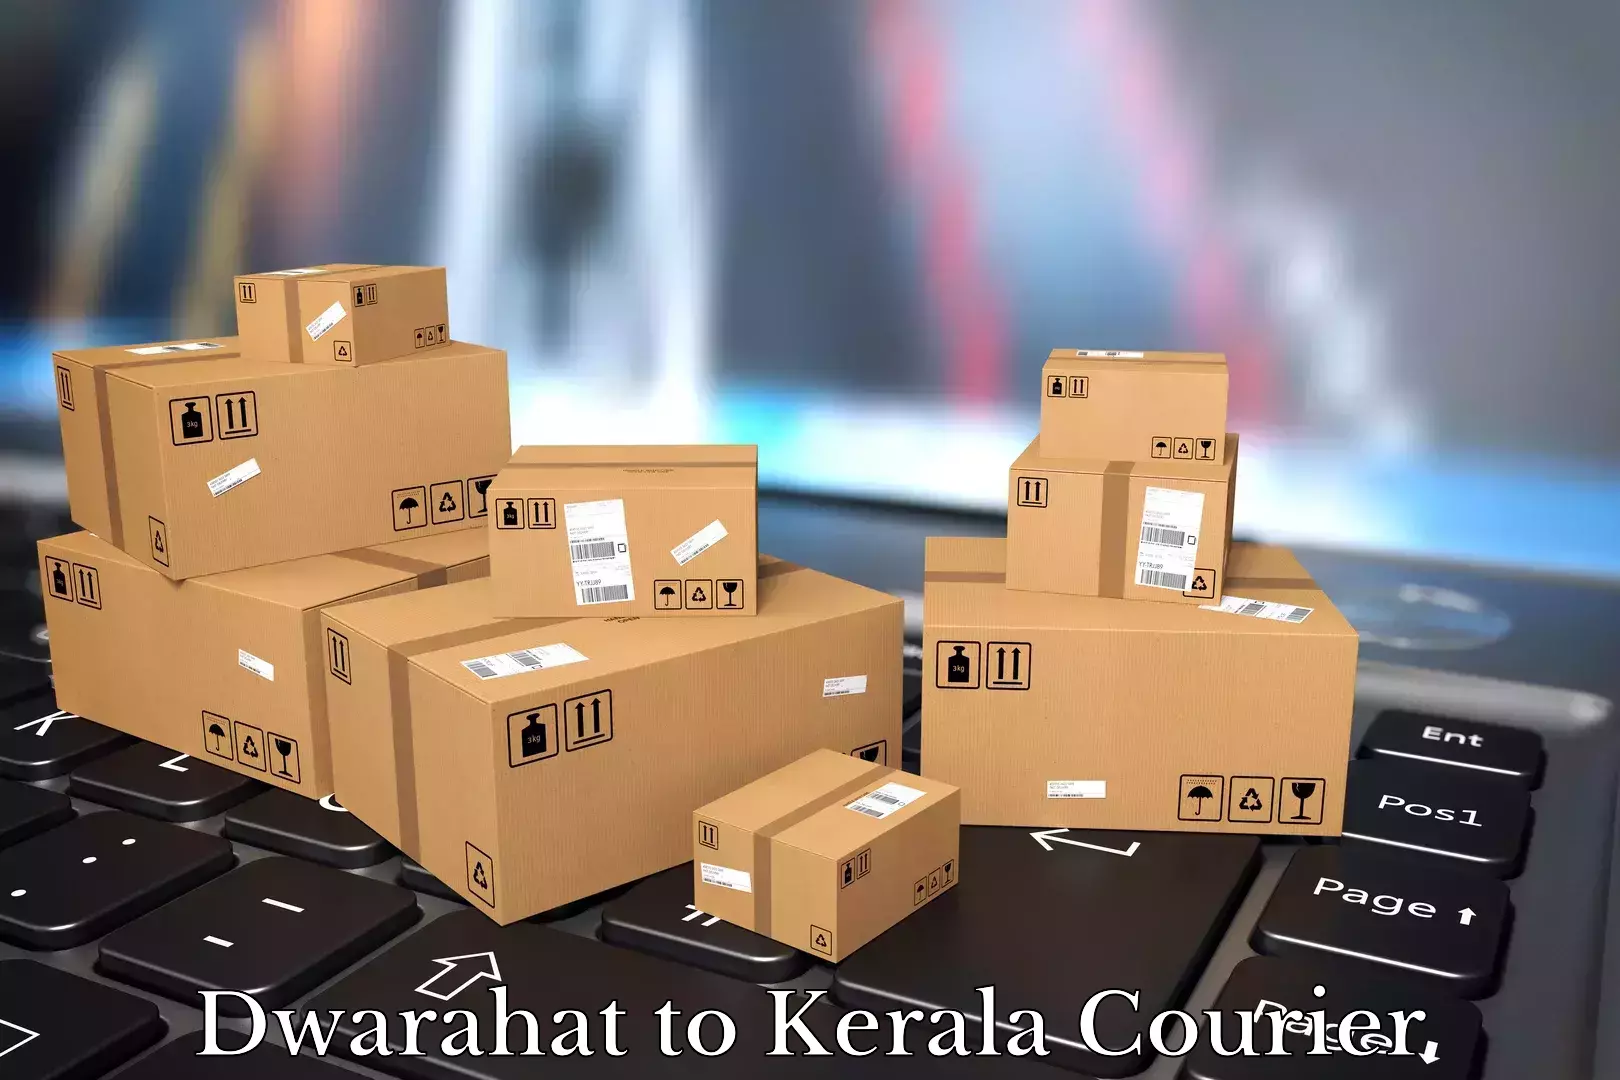 Cost-effective moving options Dwarahat to Kochi